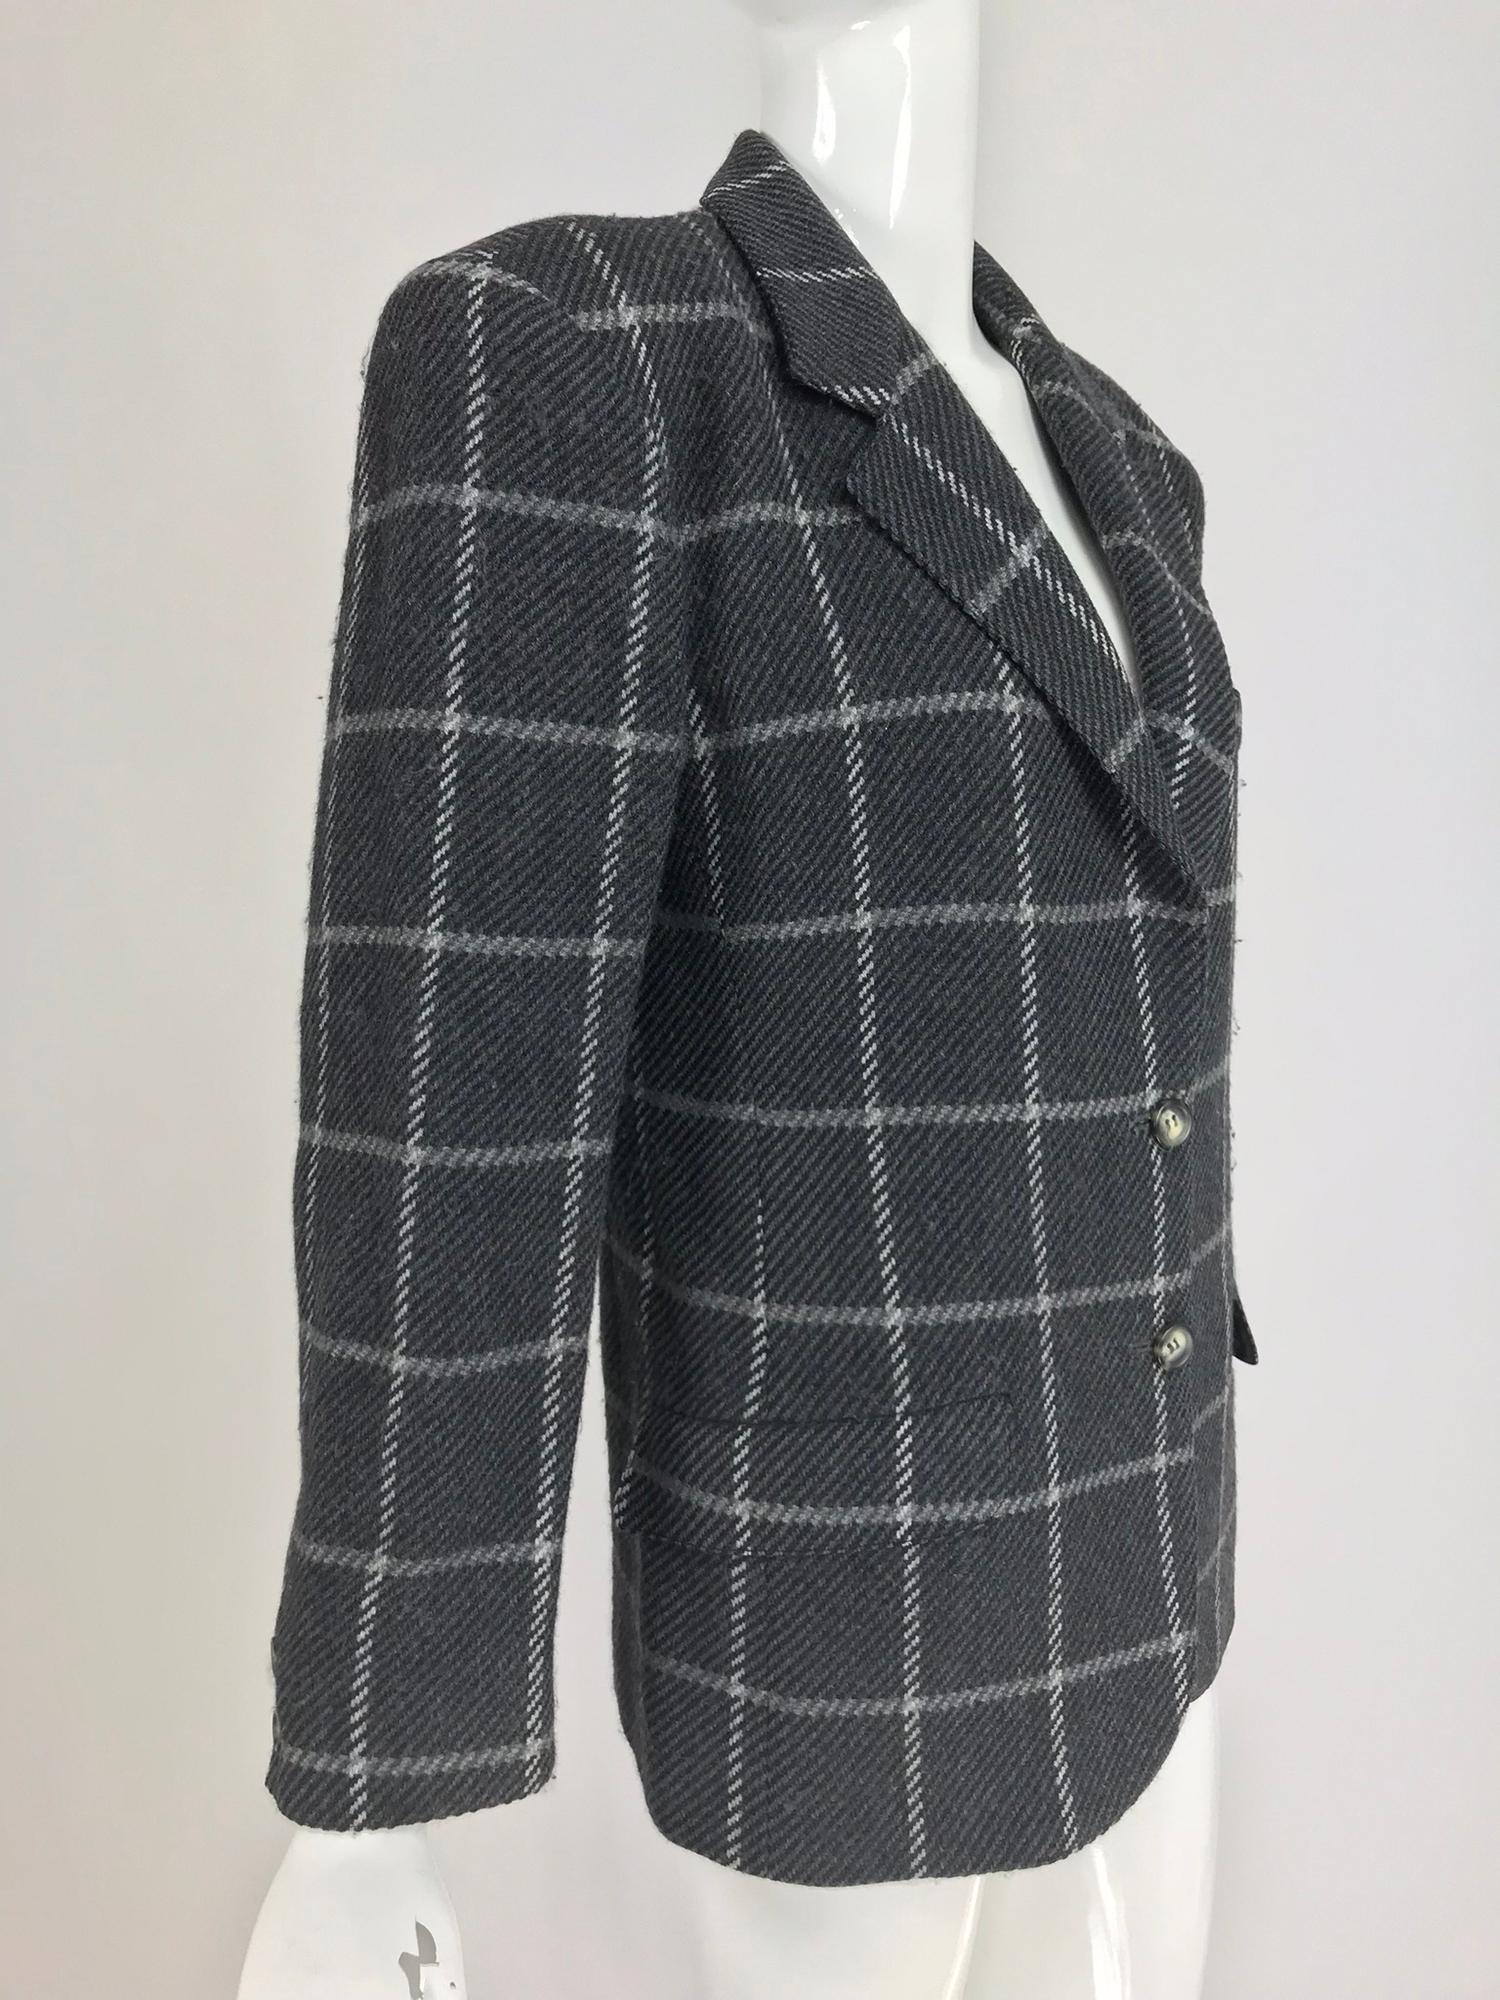 Gucci Charcoal Windowpane Check Wool and cashmere Blazer from the 1980s. Single breasted jacket has notched lapels, padded shoulders, a single besom breast pocket and double hip flap front pockets. Fully lined in black rayon.  Marked size 40.

In